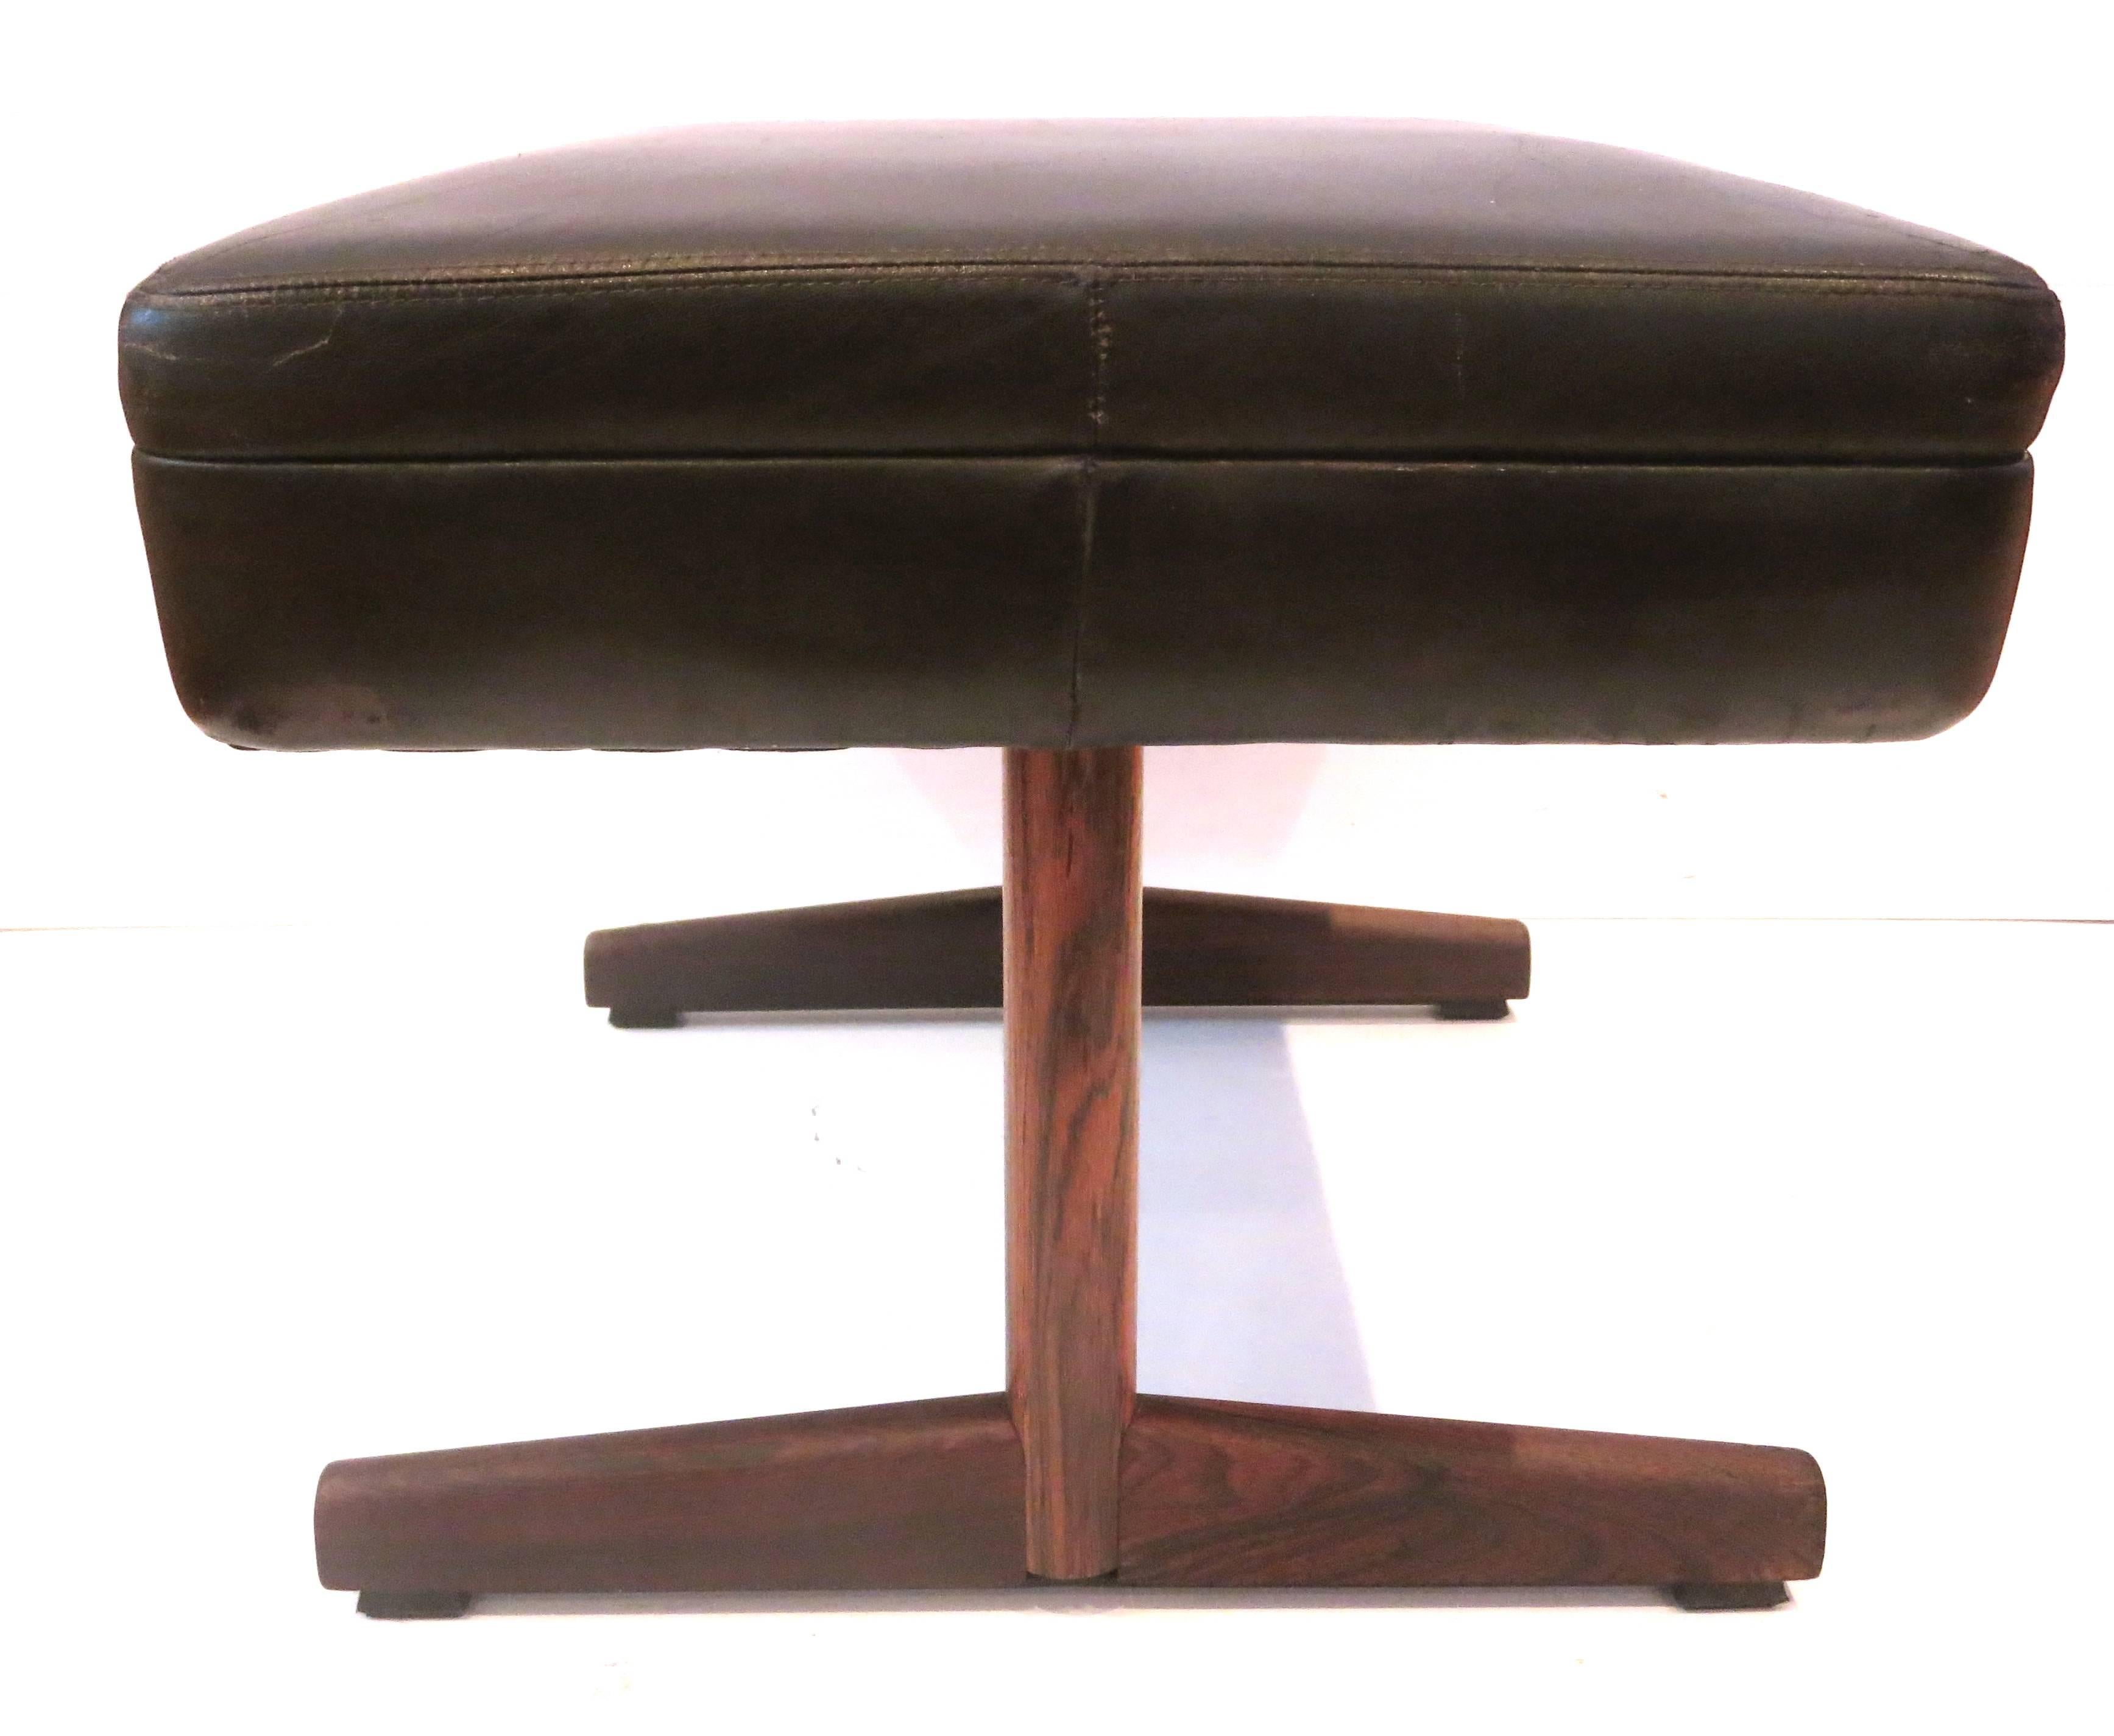 20th Century Danish Modern Rosewood and Leather Ottoman or Stool